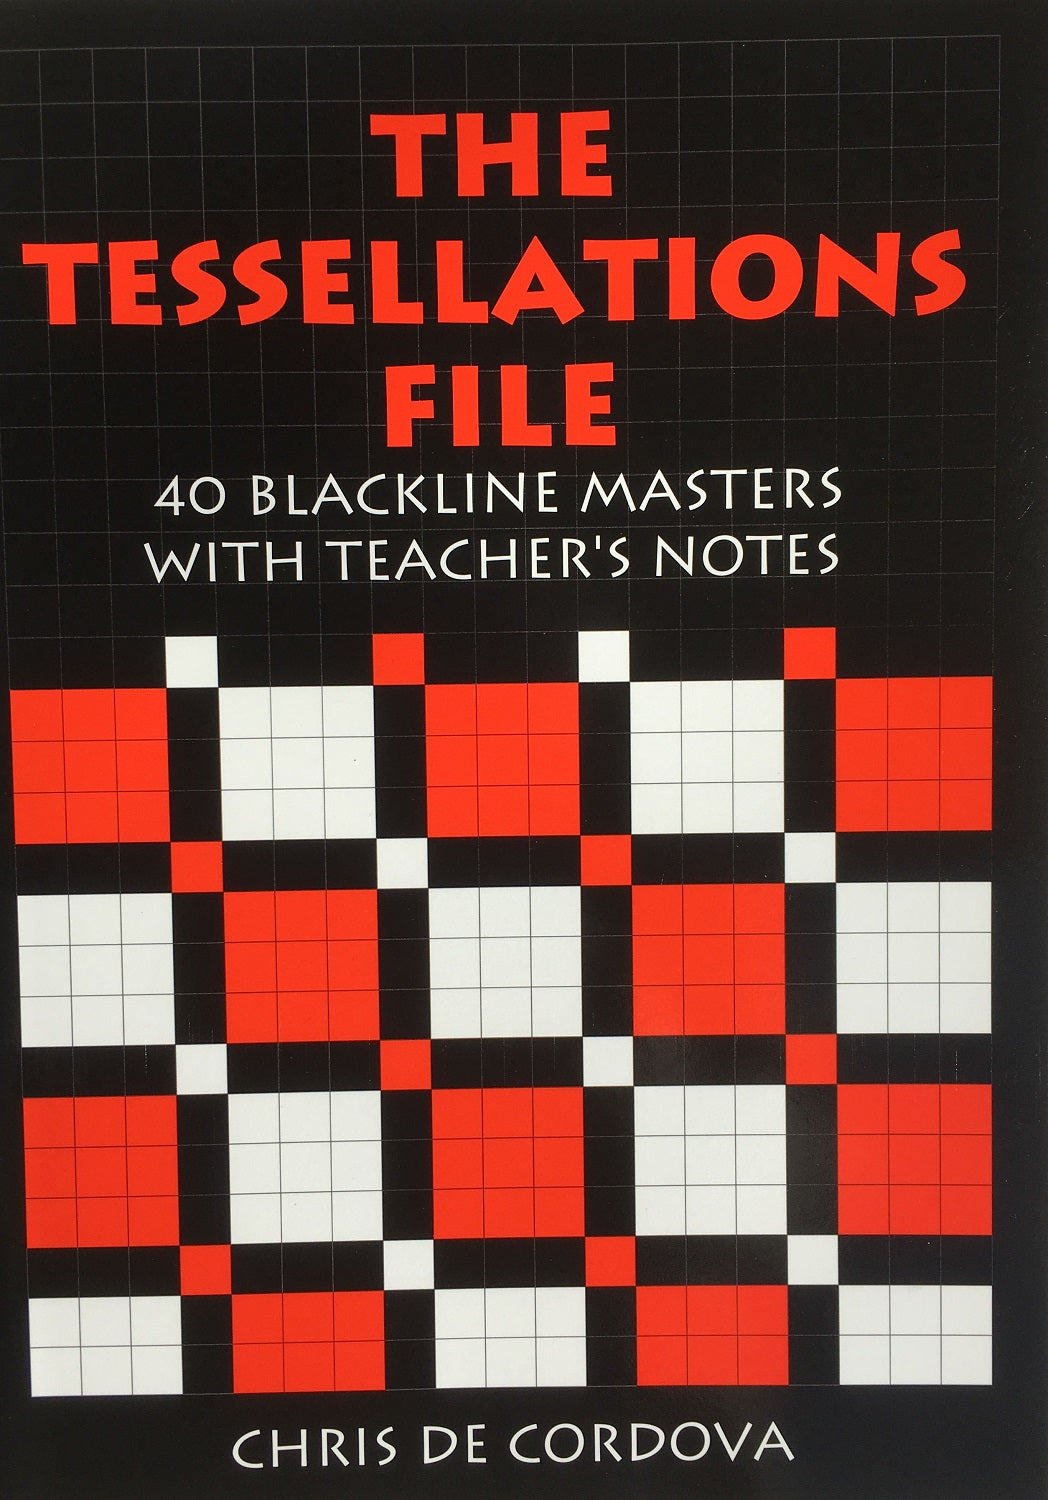 The Tessellations File: 40 Blackline Masters with Teacher's Notes